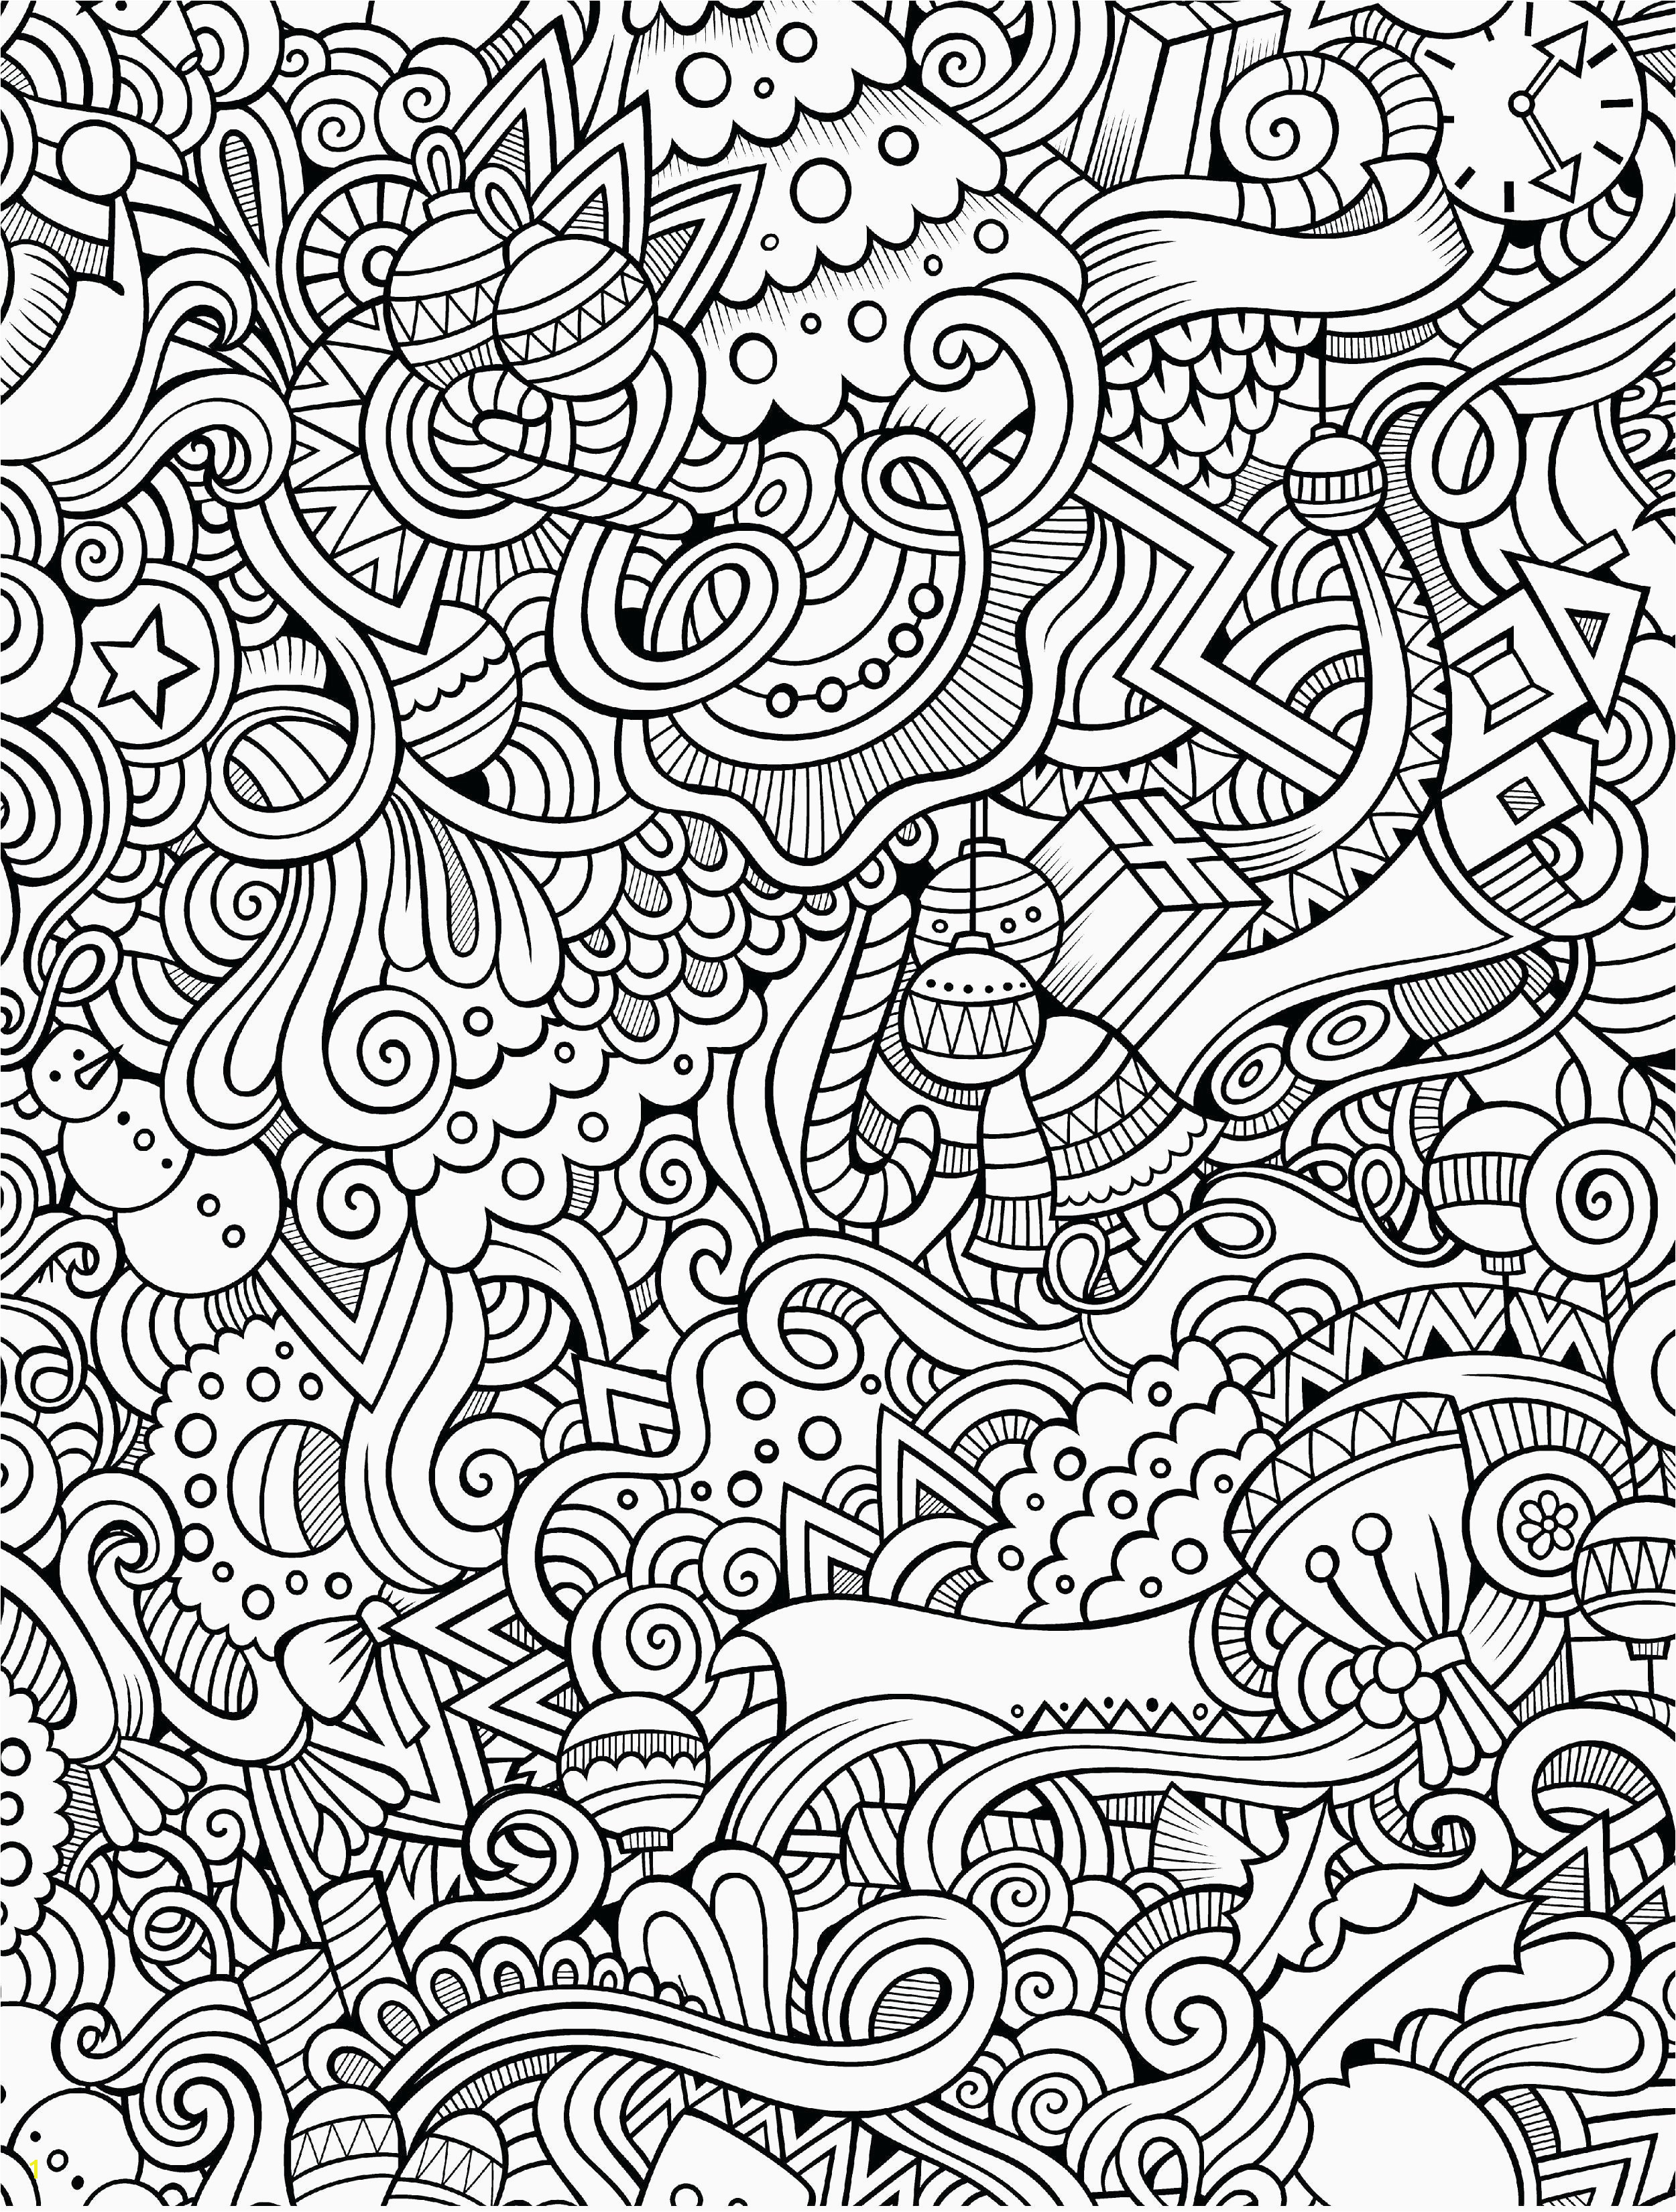 Coloring Pages Hard Abstract Coloring Pages for Teenagers Difficult Collection